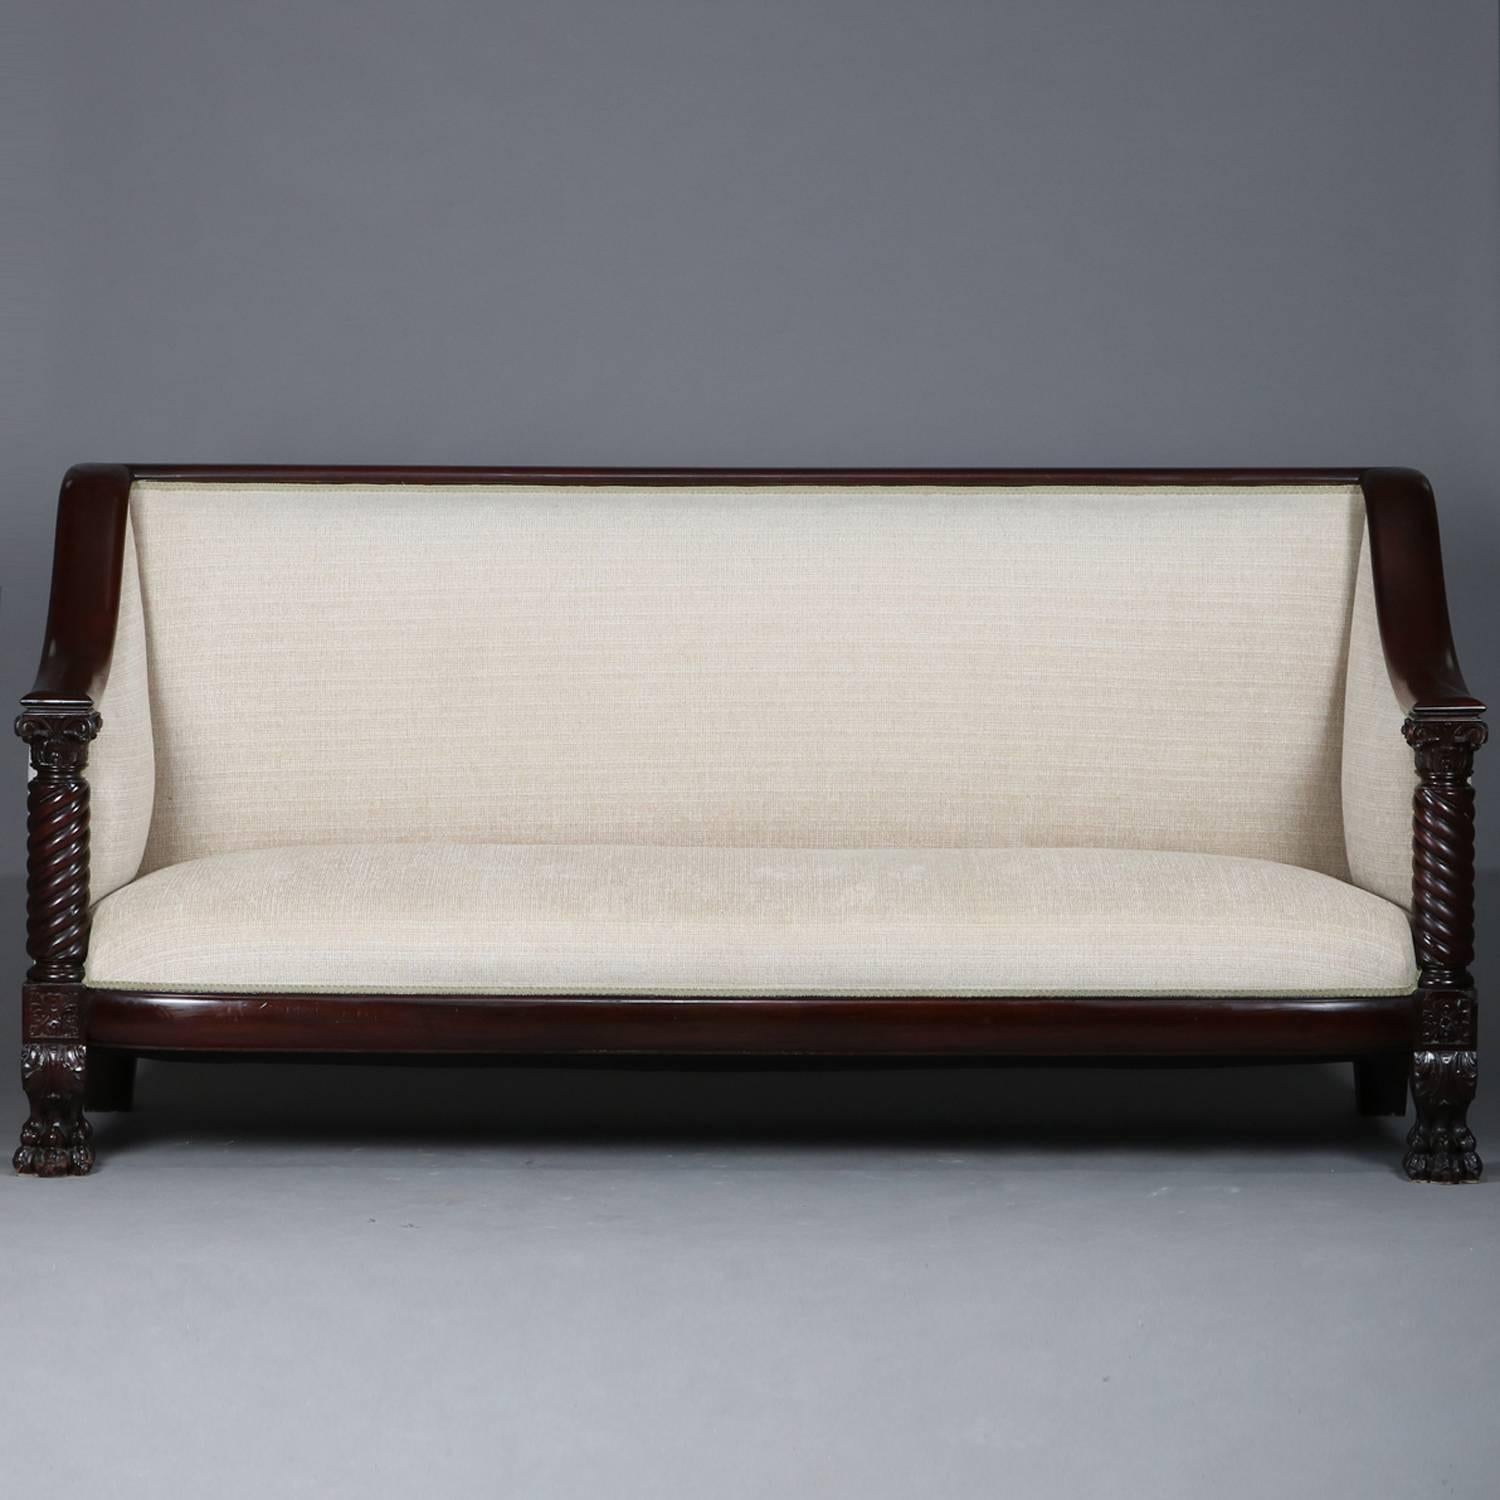 Antique Meeks School American Empire Classical upholstered carved mahogany sofa features arms with full barley twist column supports above floral carved die joints and seated on acanthus decorated paw feet, circa 1840

Measures: 41